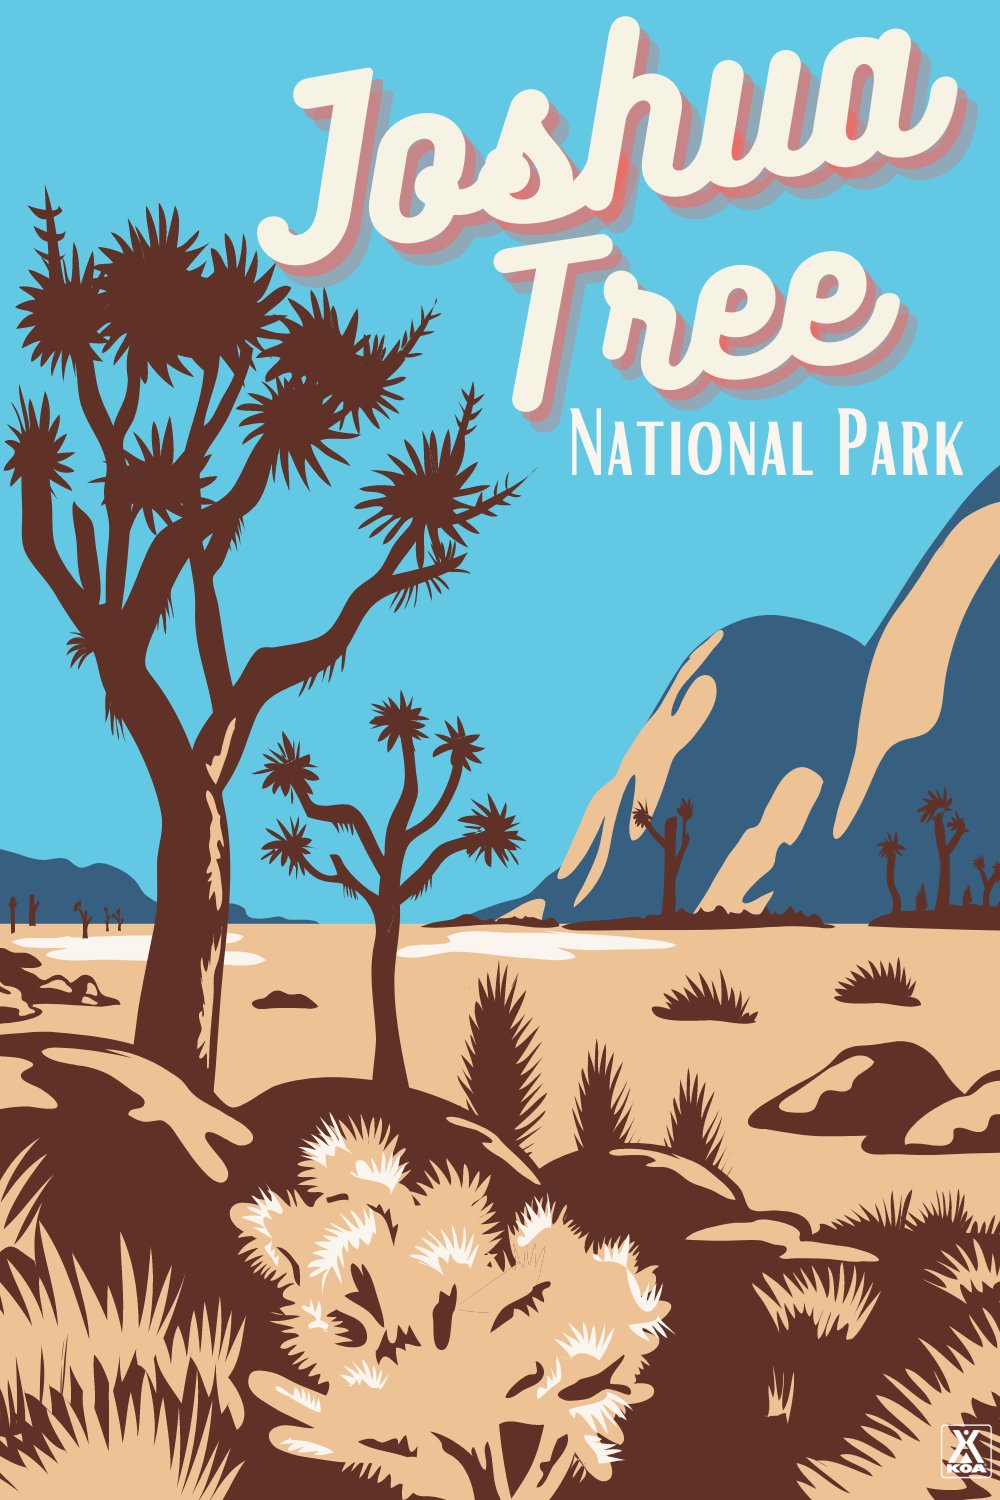 Located in California, Joshua Tree National Park offers visitors unique and striking landscapes you need to see to believe. Use our guide to learn everything you need to know, see and do in Joshua Tree National Park.